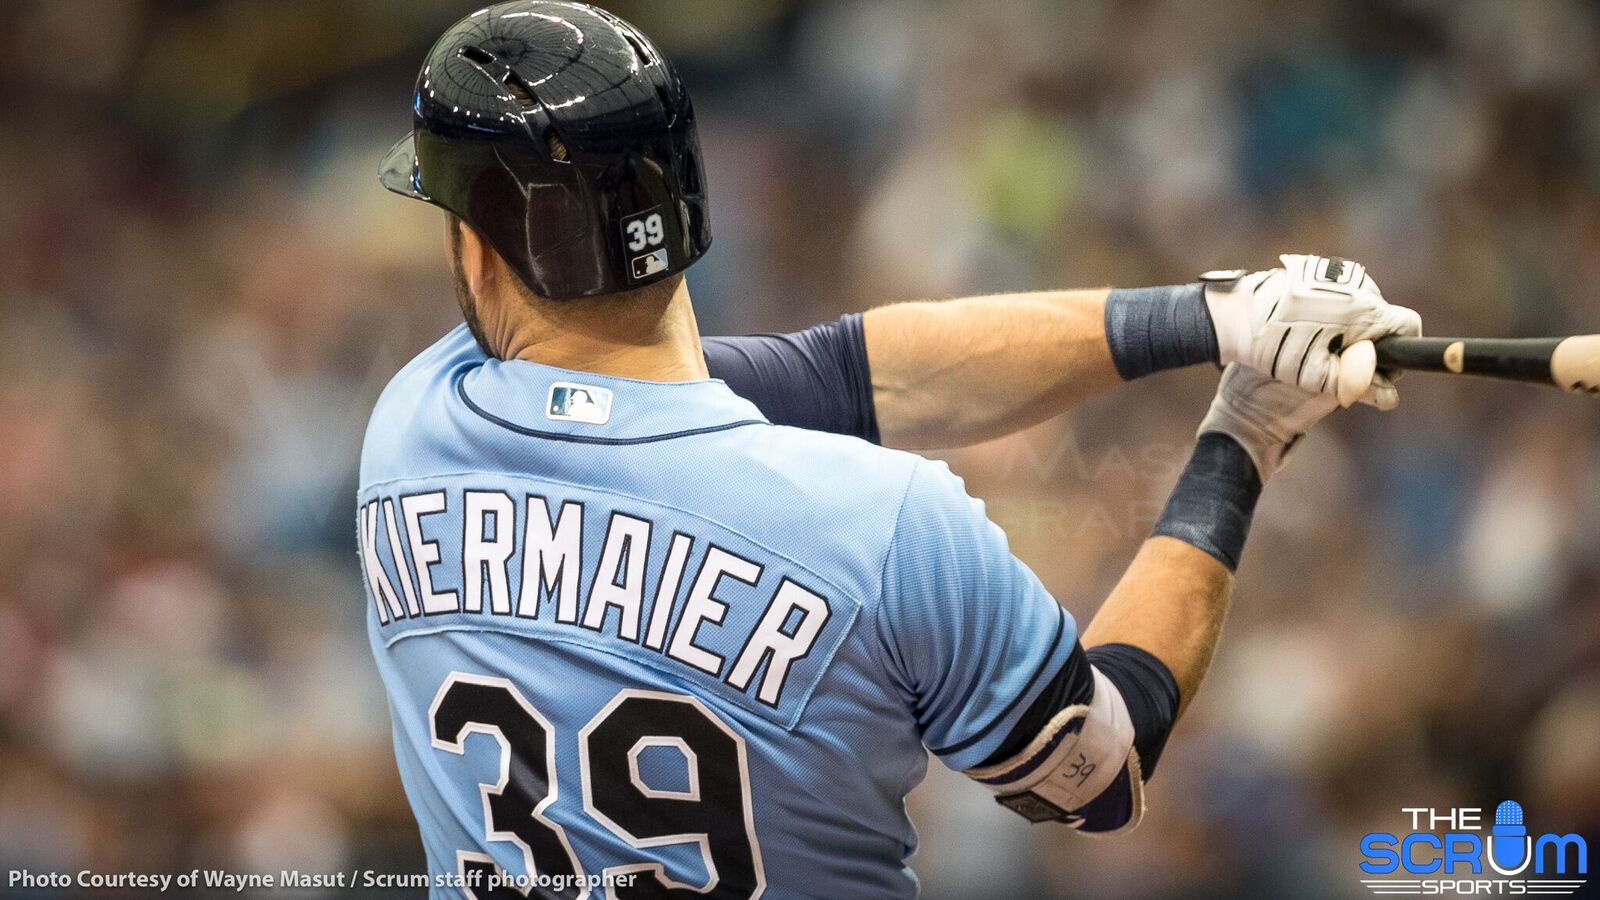 Kiermaier named finalist by rawlings for second year in a row